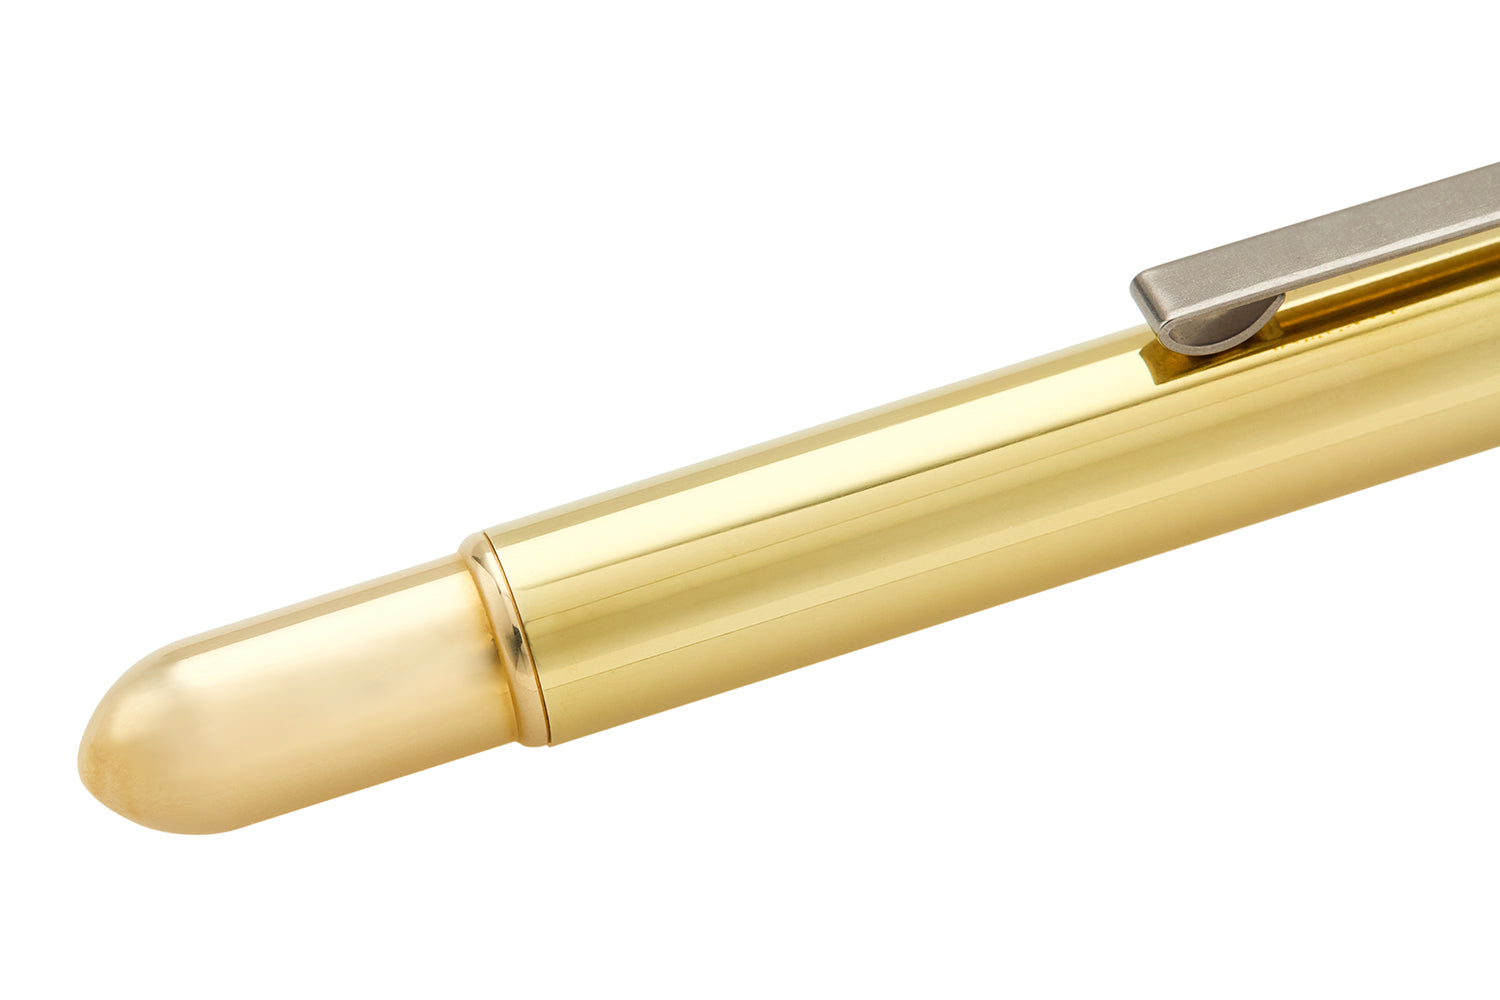 Traveler's Company Brass Fountain Pen: A New Twist on a Vintage Form Factor  — The Gentleman Stationer